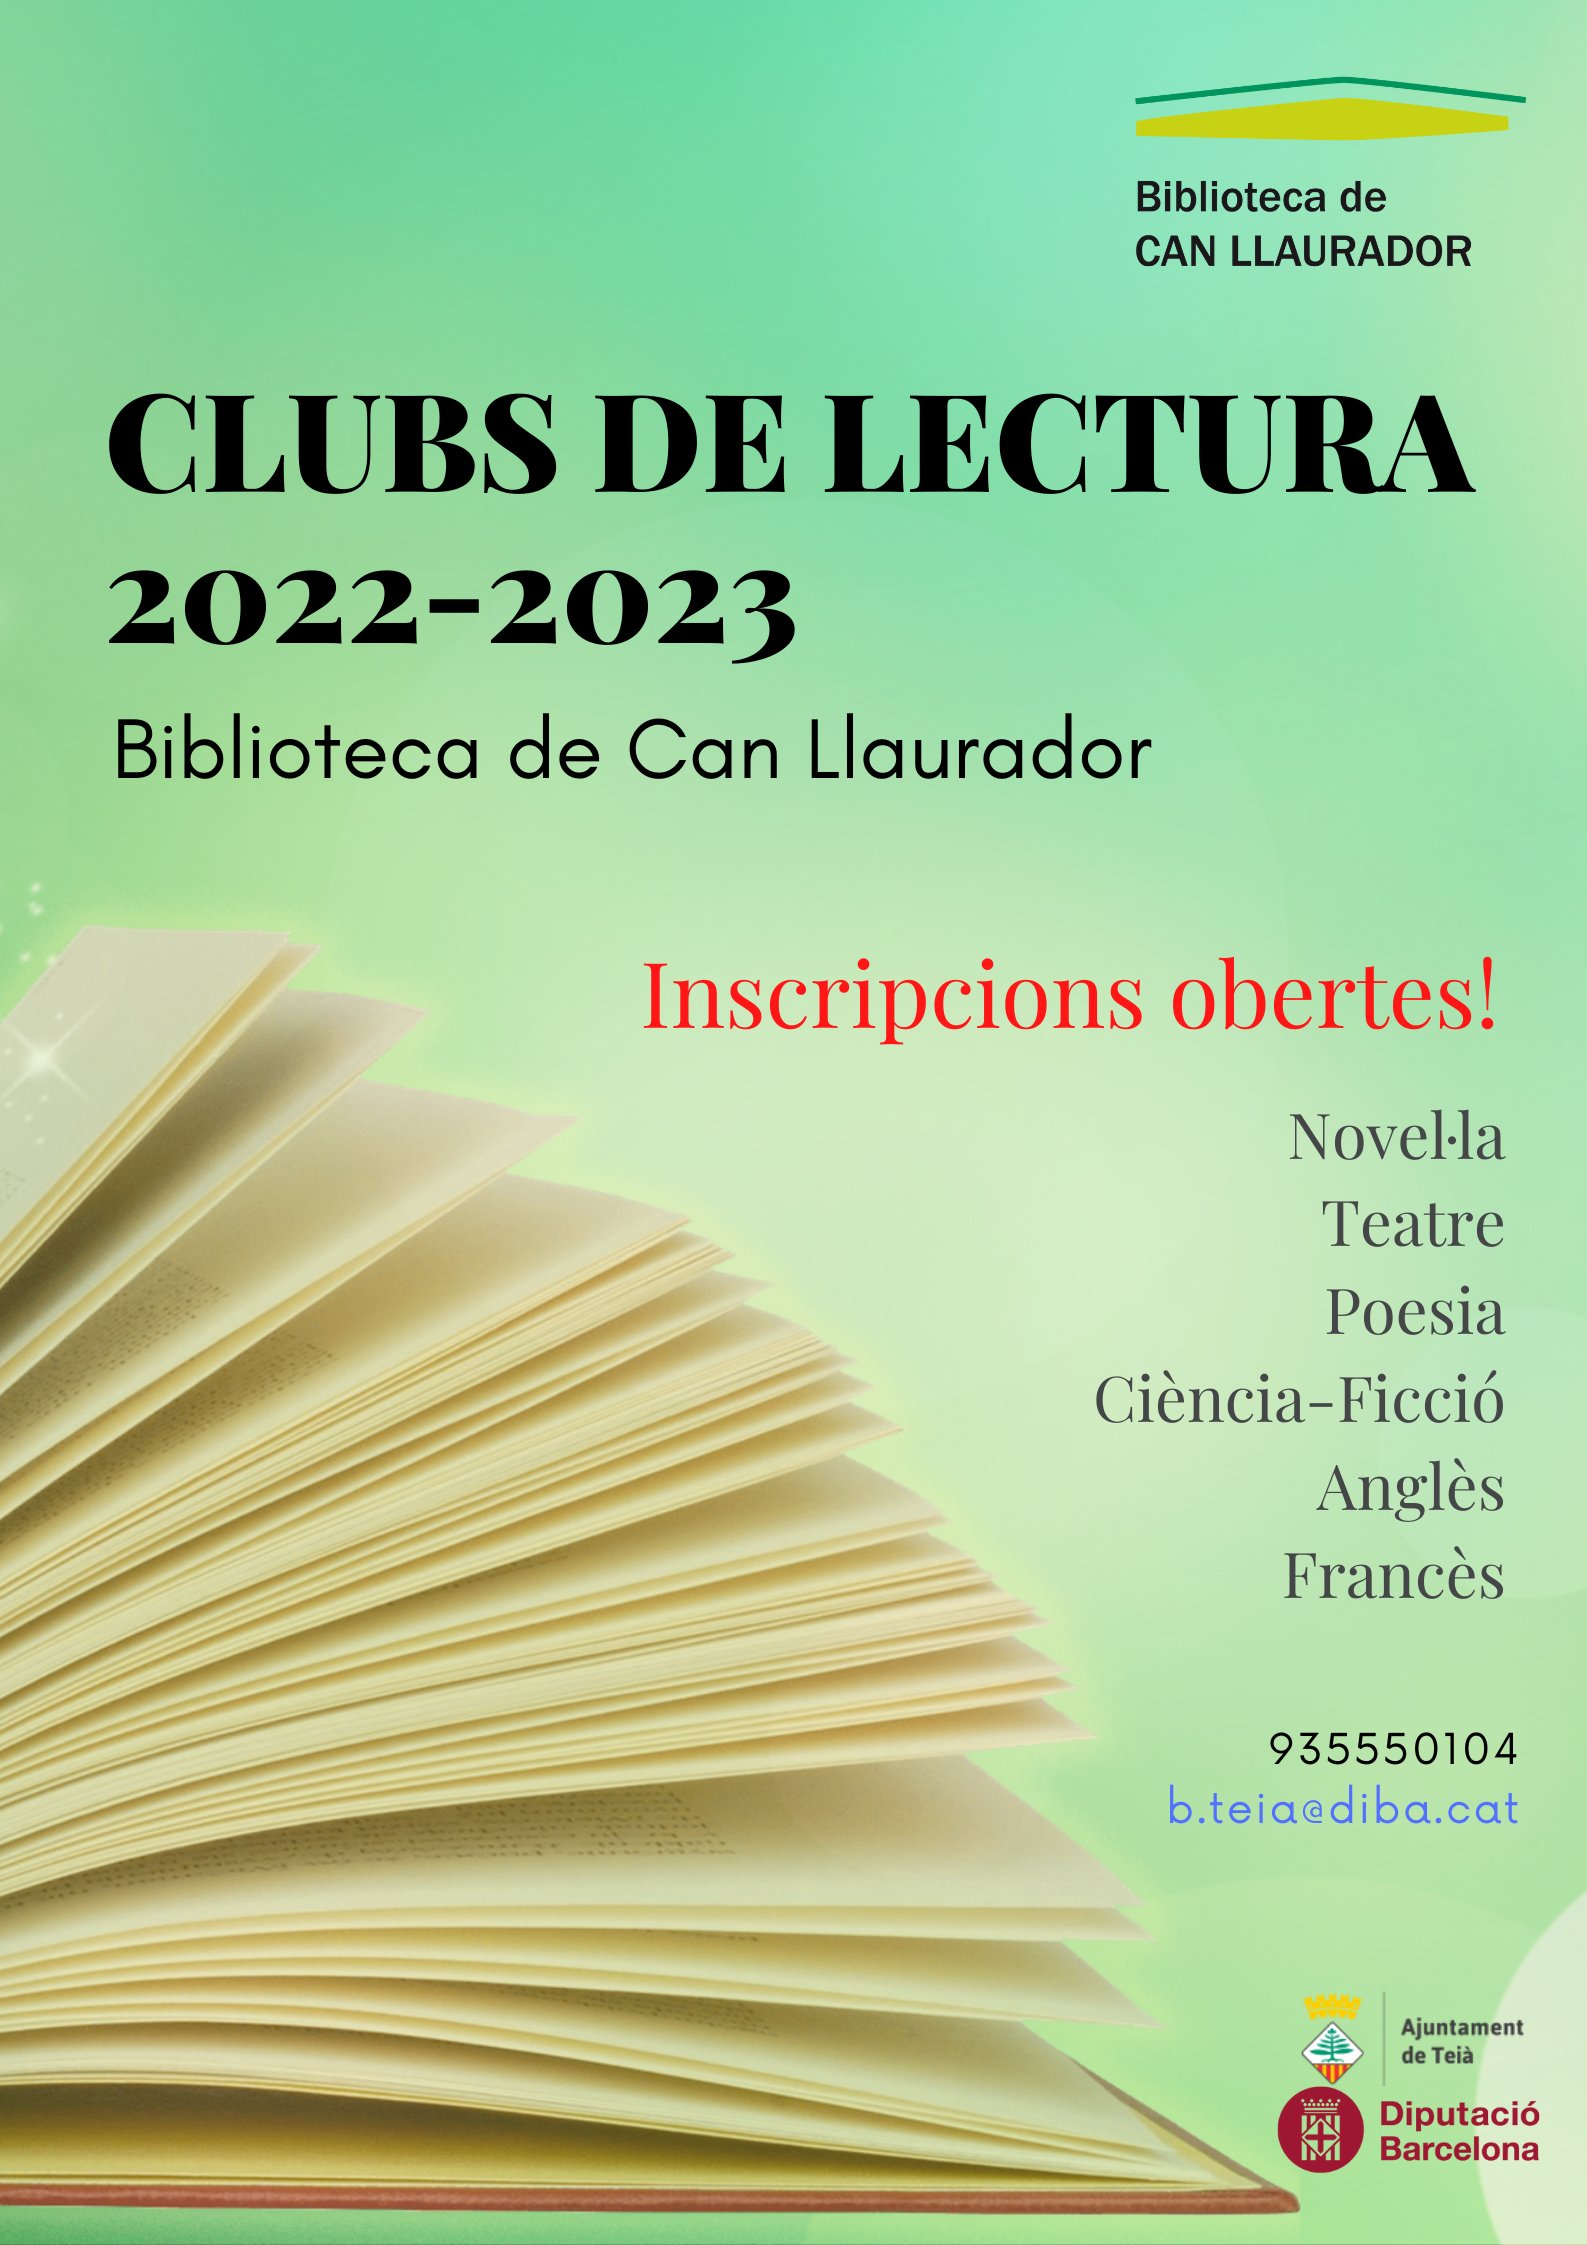 ClubsLectura